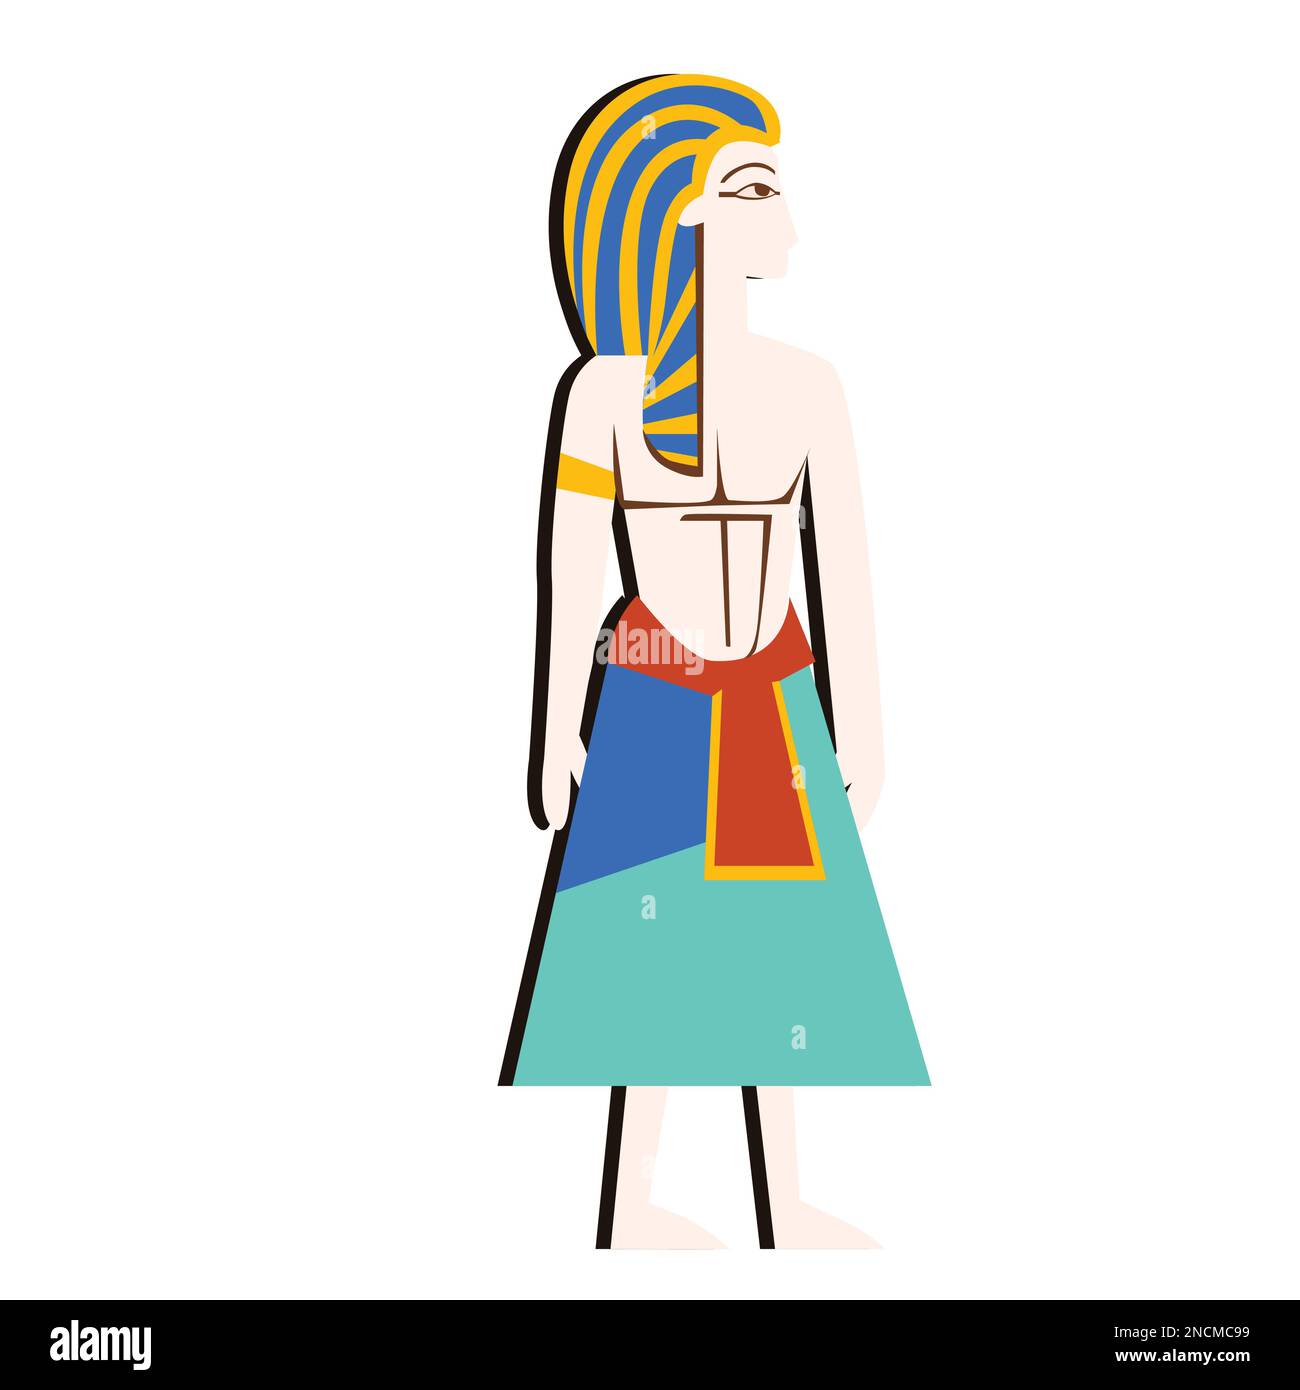 Ancient Egypt wall art or mural element cartoon vector. Ancient monumental painting with Egyptian culture symbol, pharaoh figure, man in blue yellow nemes hat, headdress, isolated on white background Stock Vector